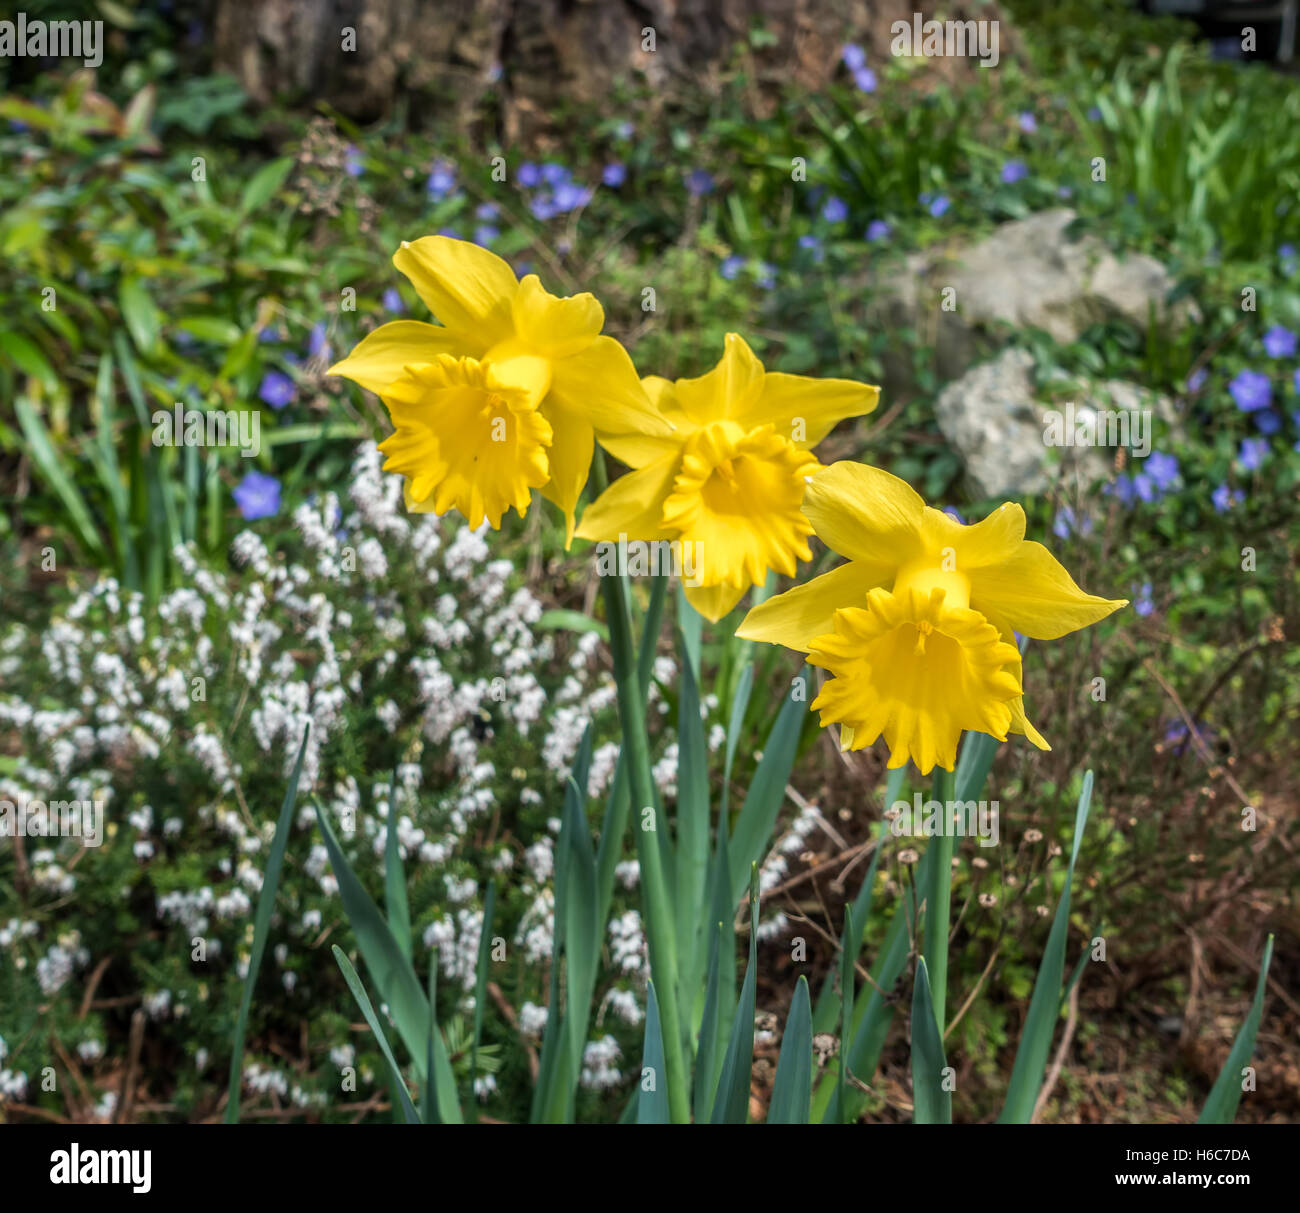 Three Daffodils bloom in Spring. Stock Photo